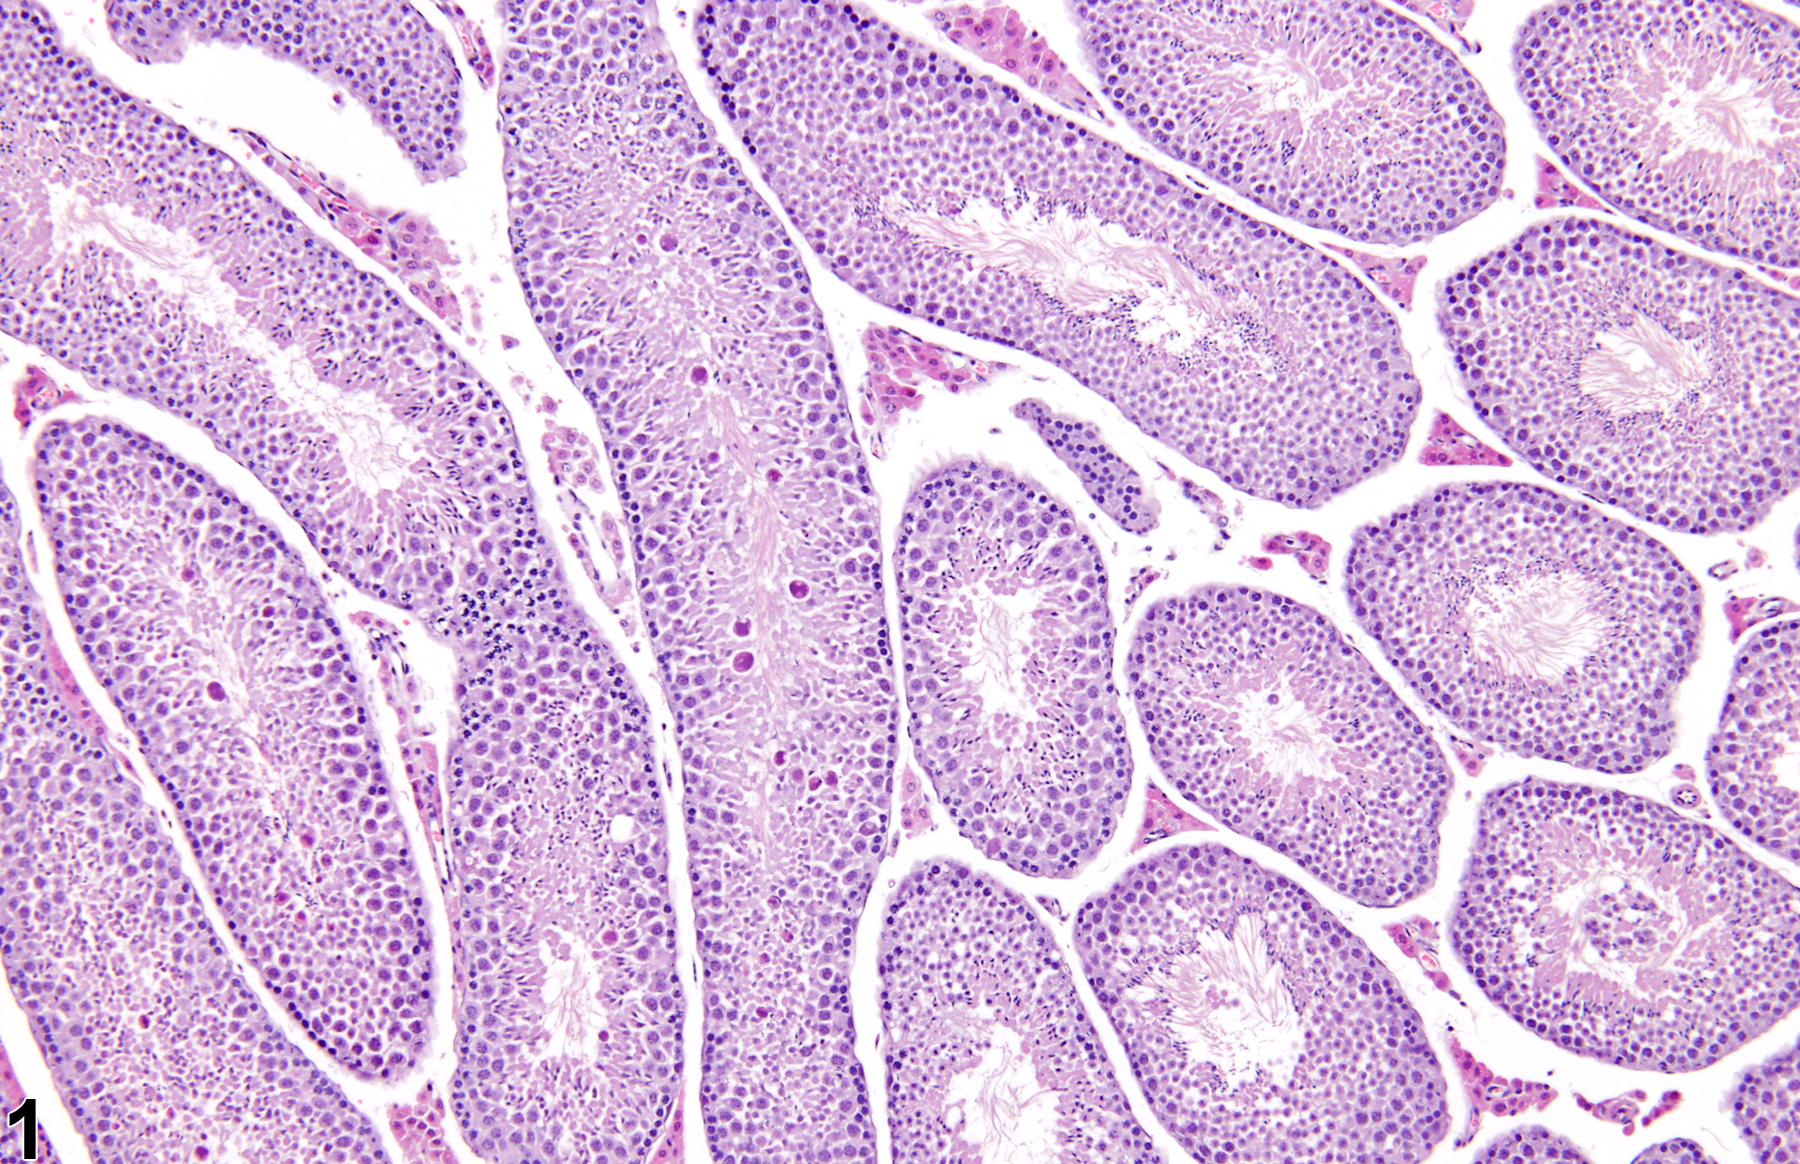 Image of atypical residual bodies in the testis from a male B6C3F1 mouse in a subchronic study